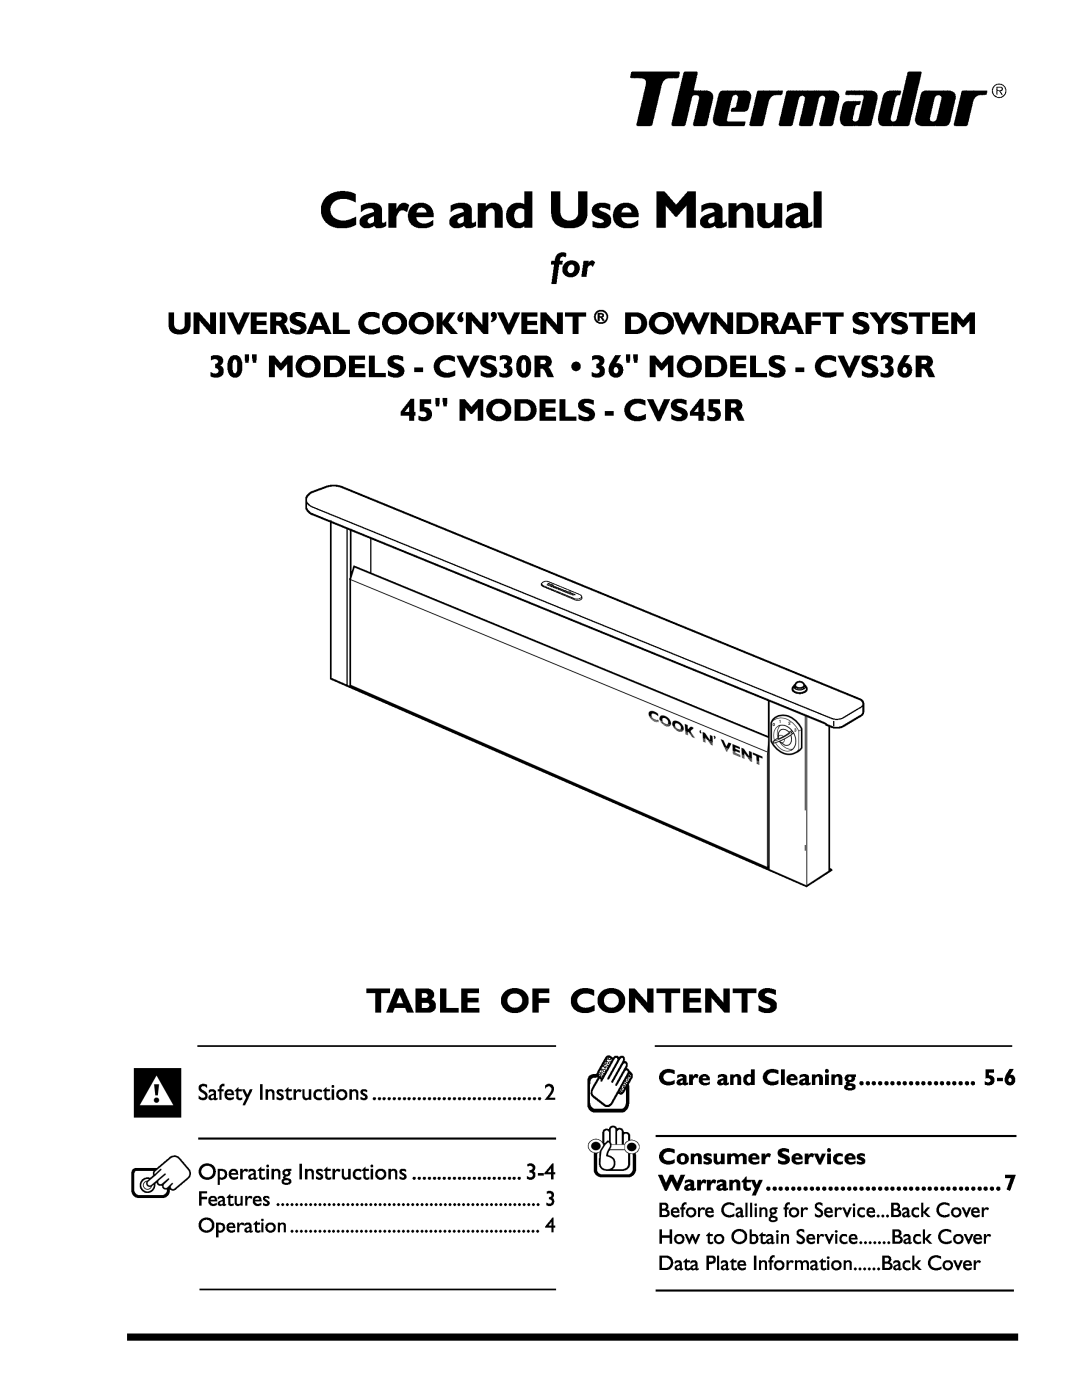 Thermador CVS30R 36, CVS36R 45 manual Warranty, Care and Cleaning, Consumer Services, Back Cover, Care and Use Manual 